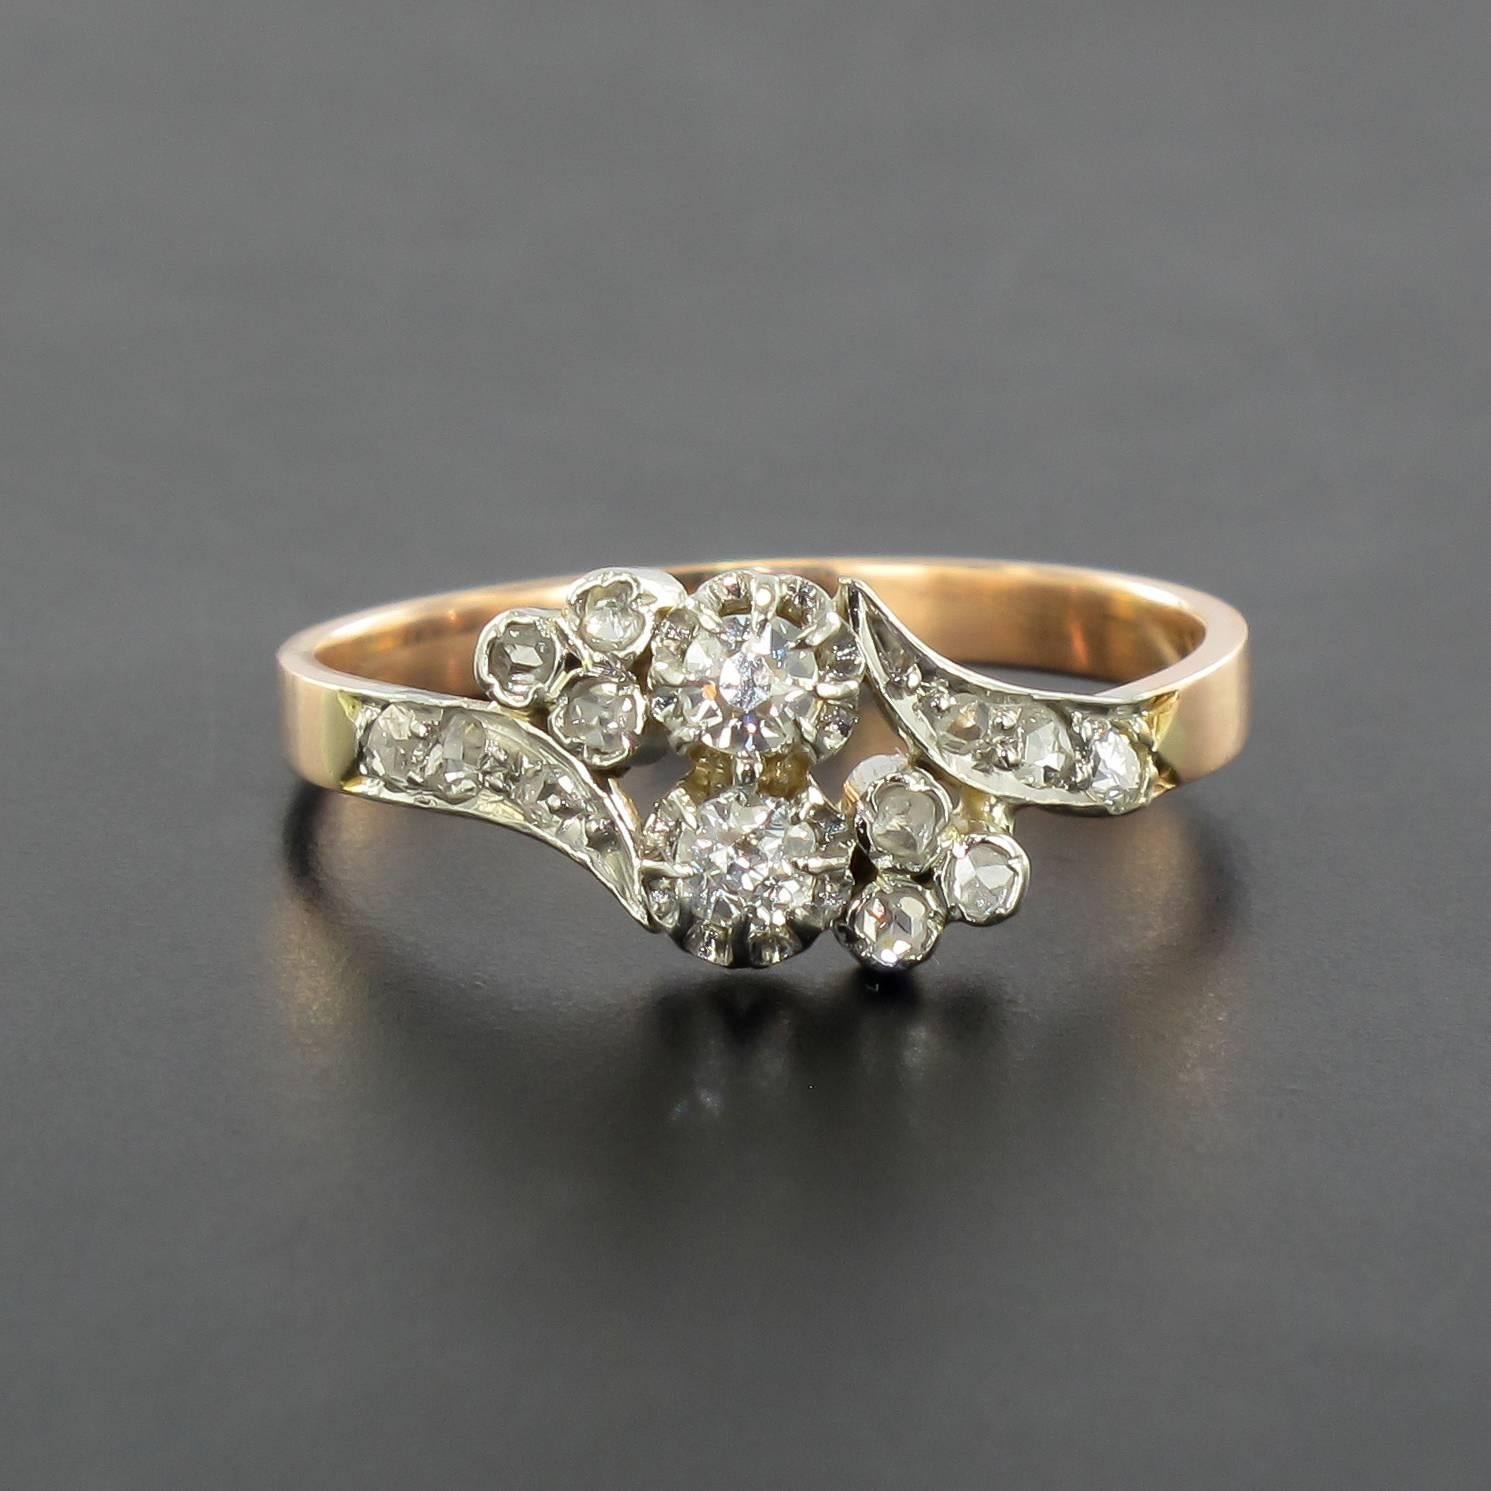 Ring in 18 carat rose gold, eagle head hallmark. 

This splendid antique ring is set with 2 brilliant cut diamonds accentuated by a clover shape on each side each set with 3 rose cut diamonds. 3 more rose cut diamonds enhance the beginning of the